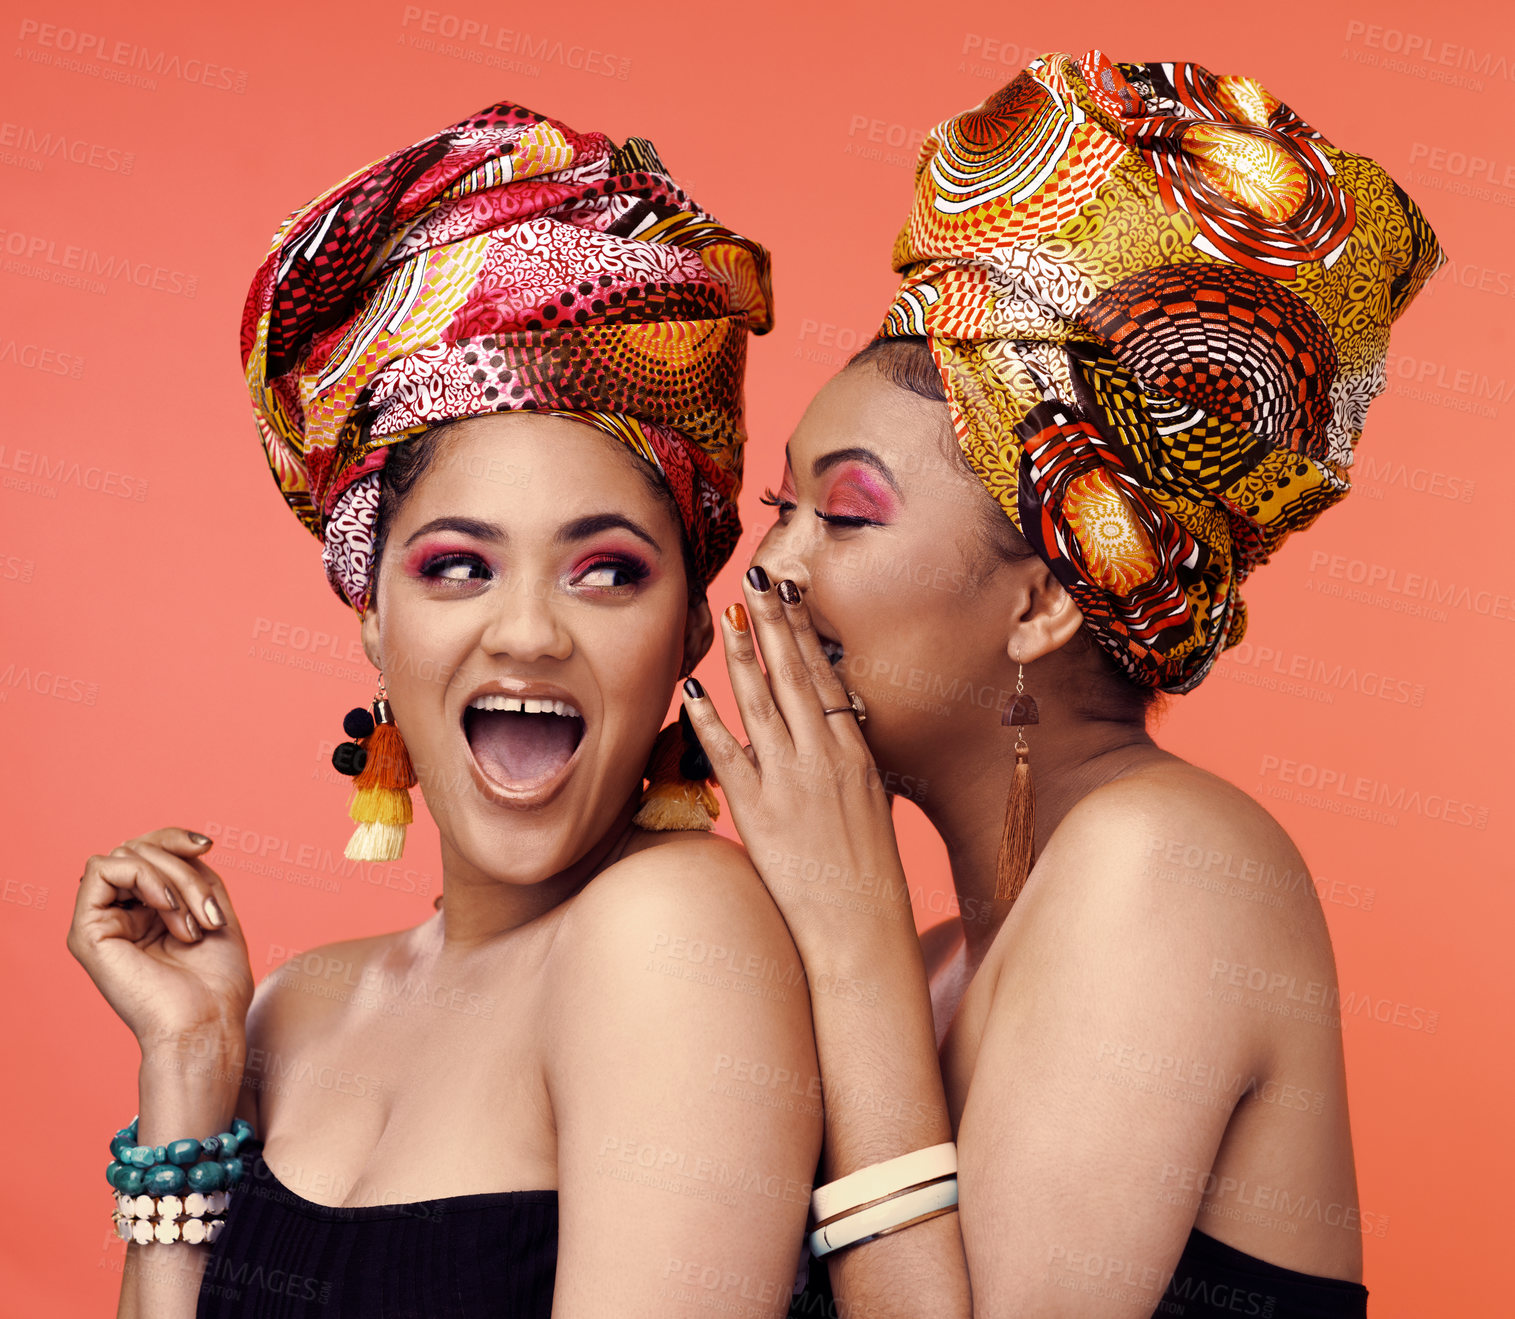 Buy stock photo Studio shot of two attractive young women wearing traditional  African head wraps posing together against an orange background